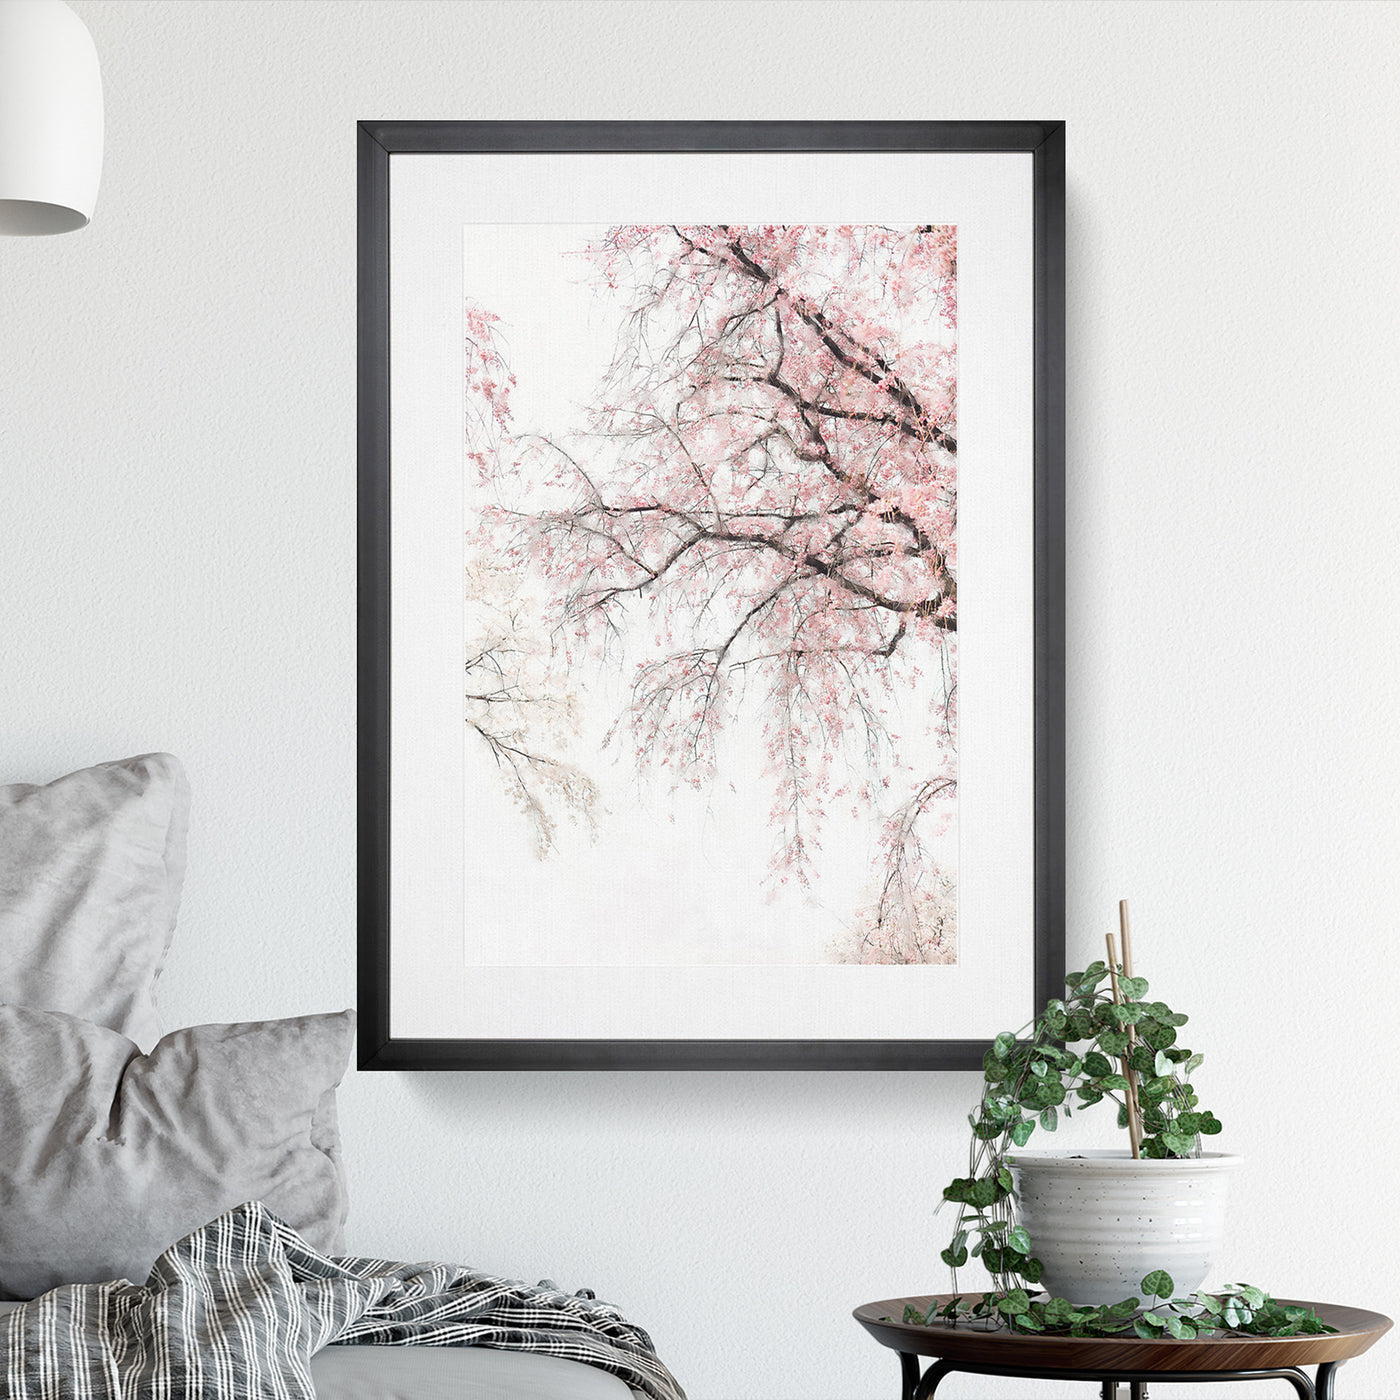 A Pink Cherry Blossom Tree Abstract